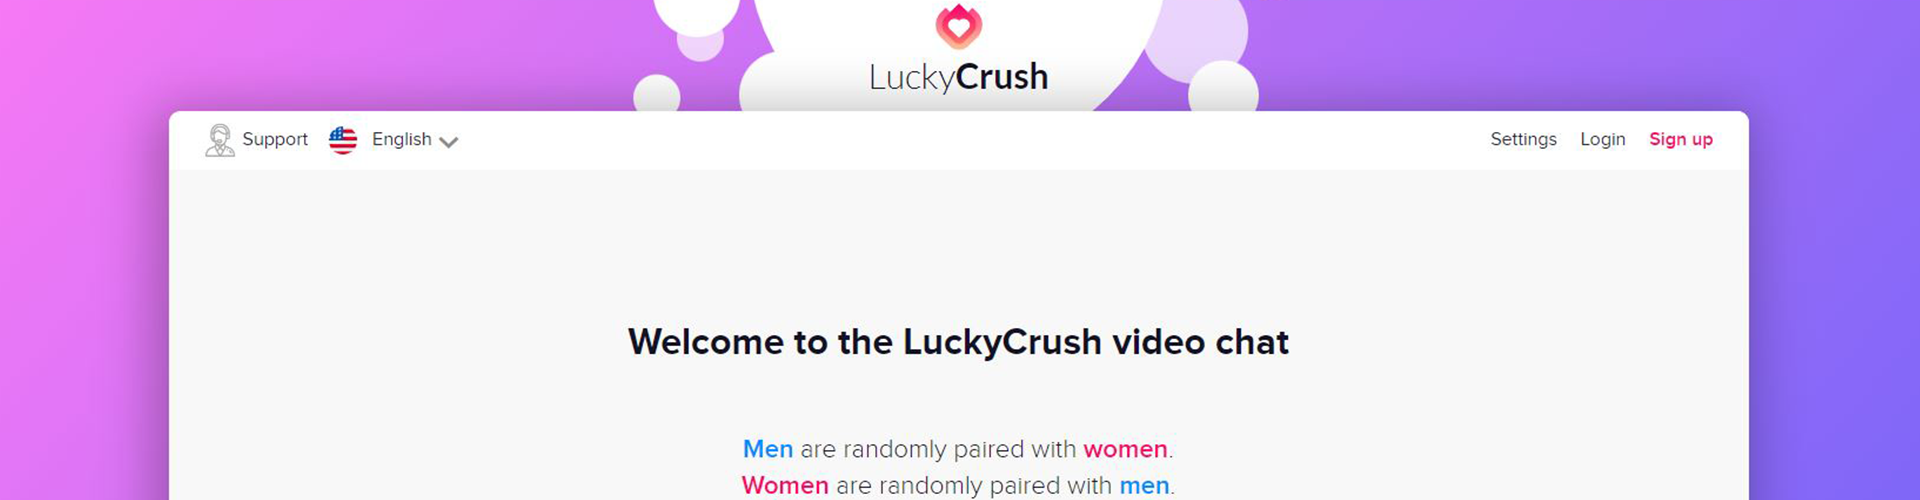 Get Titillated by Virtual Flirting with Random Partners at LuckyCrush